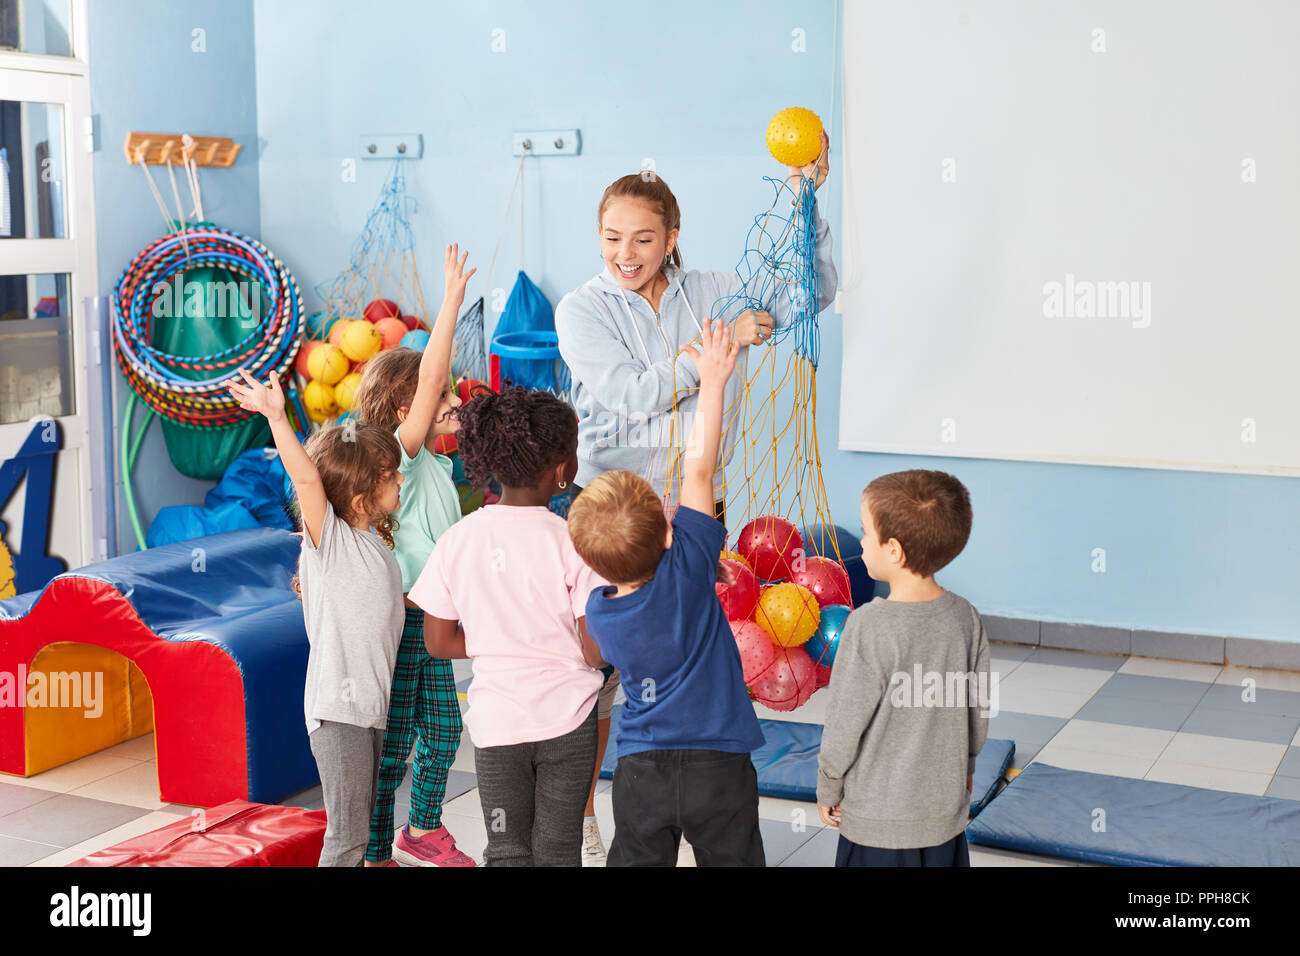 Sports teacher and children in the gymnasium of elementary school are looking forward to ball game Stock Photo